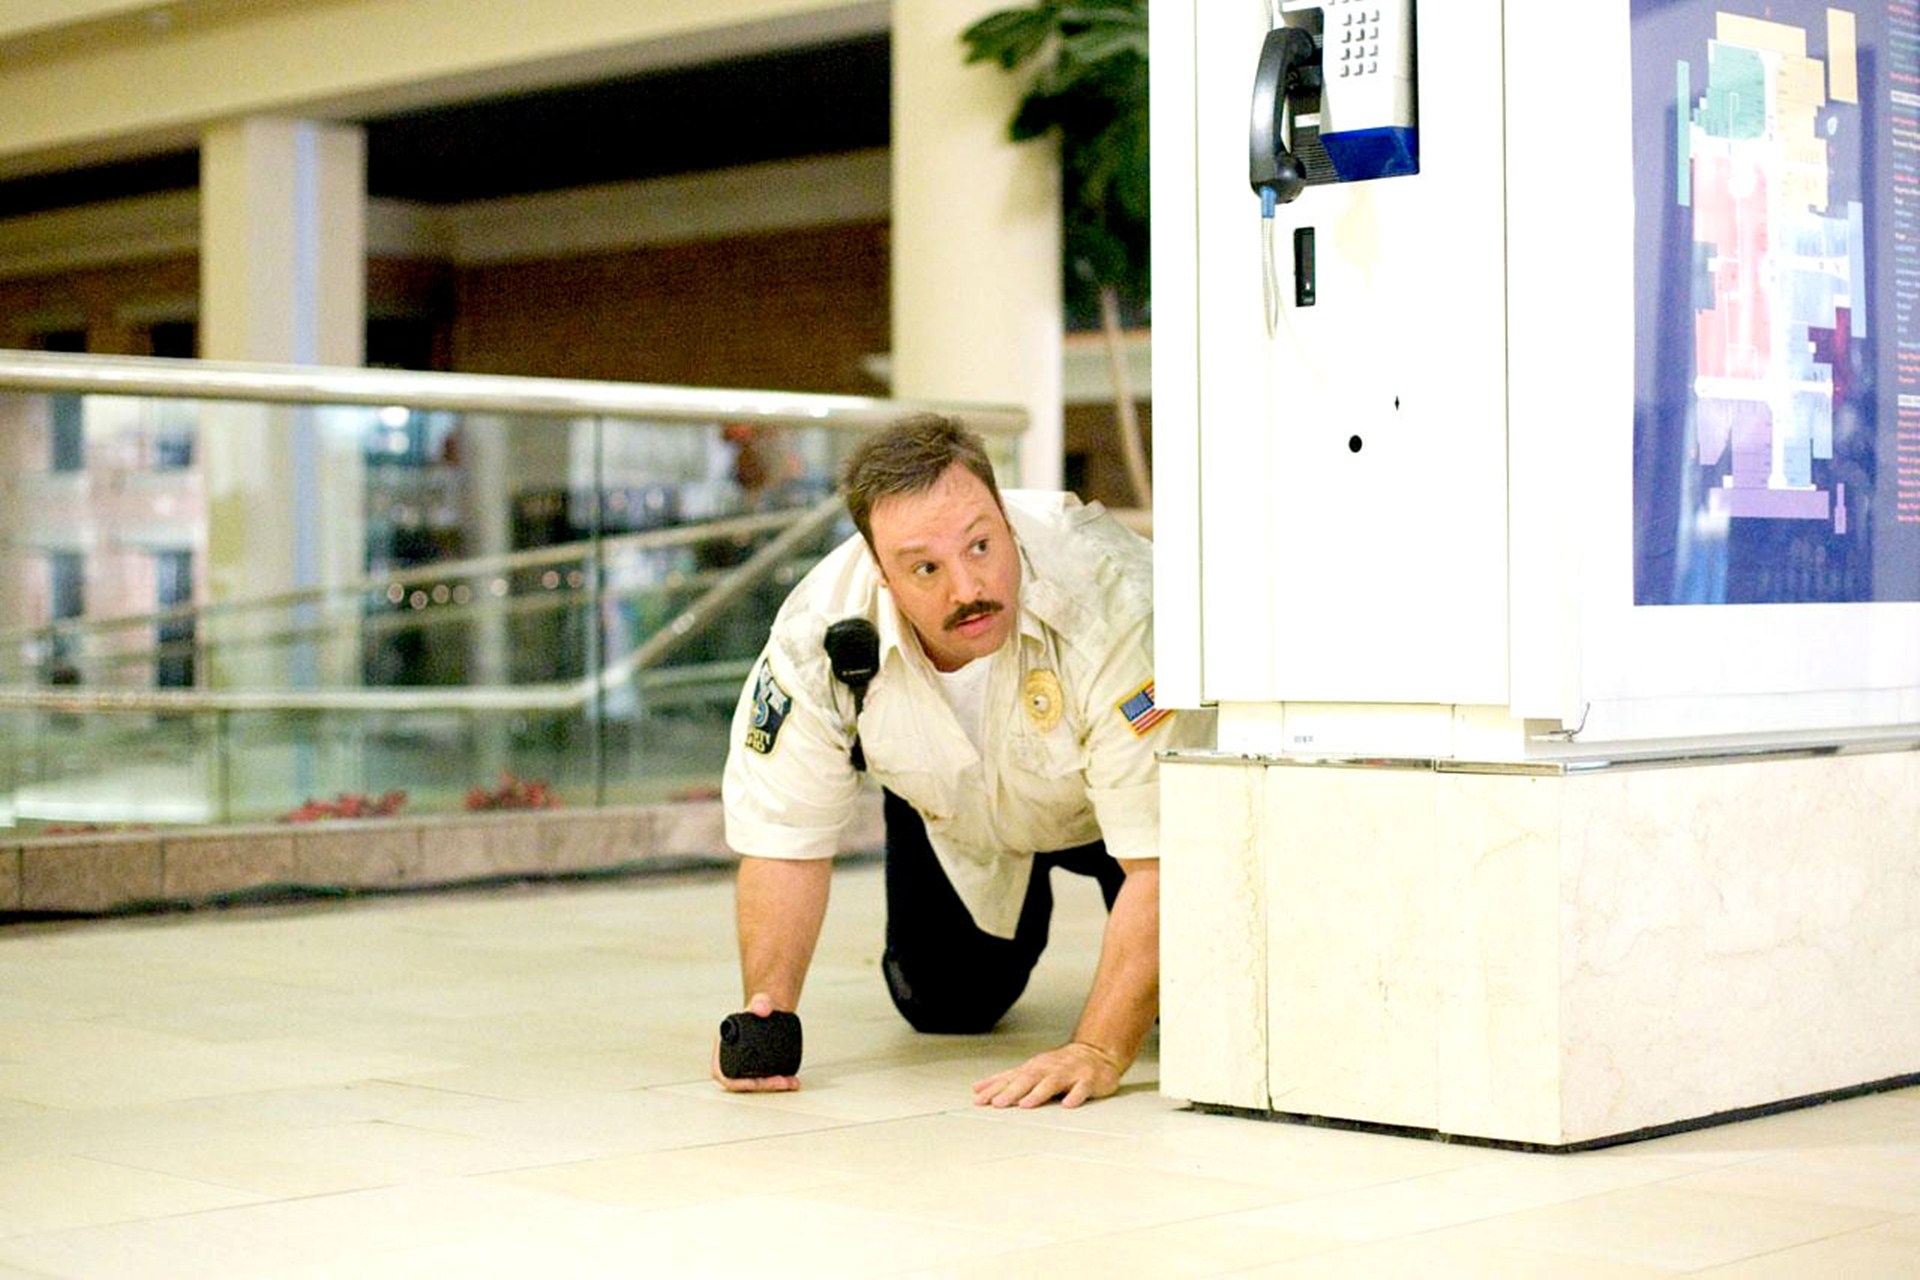 Paul Blart: Mall Cop 2 High Quality Background on Wallpapers Vista